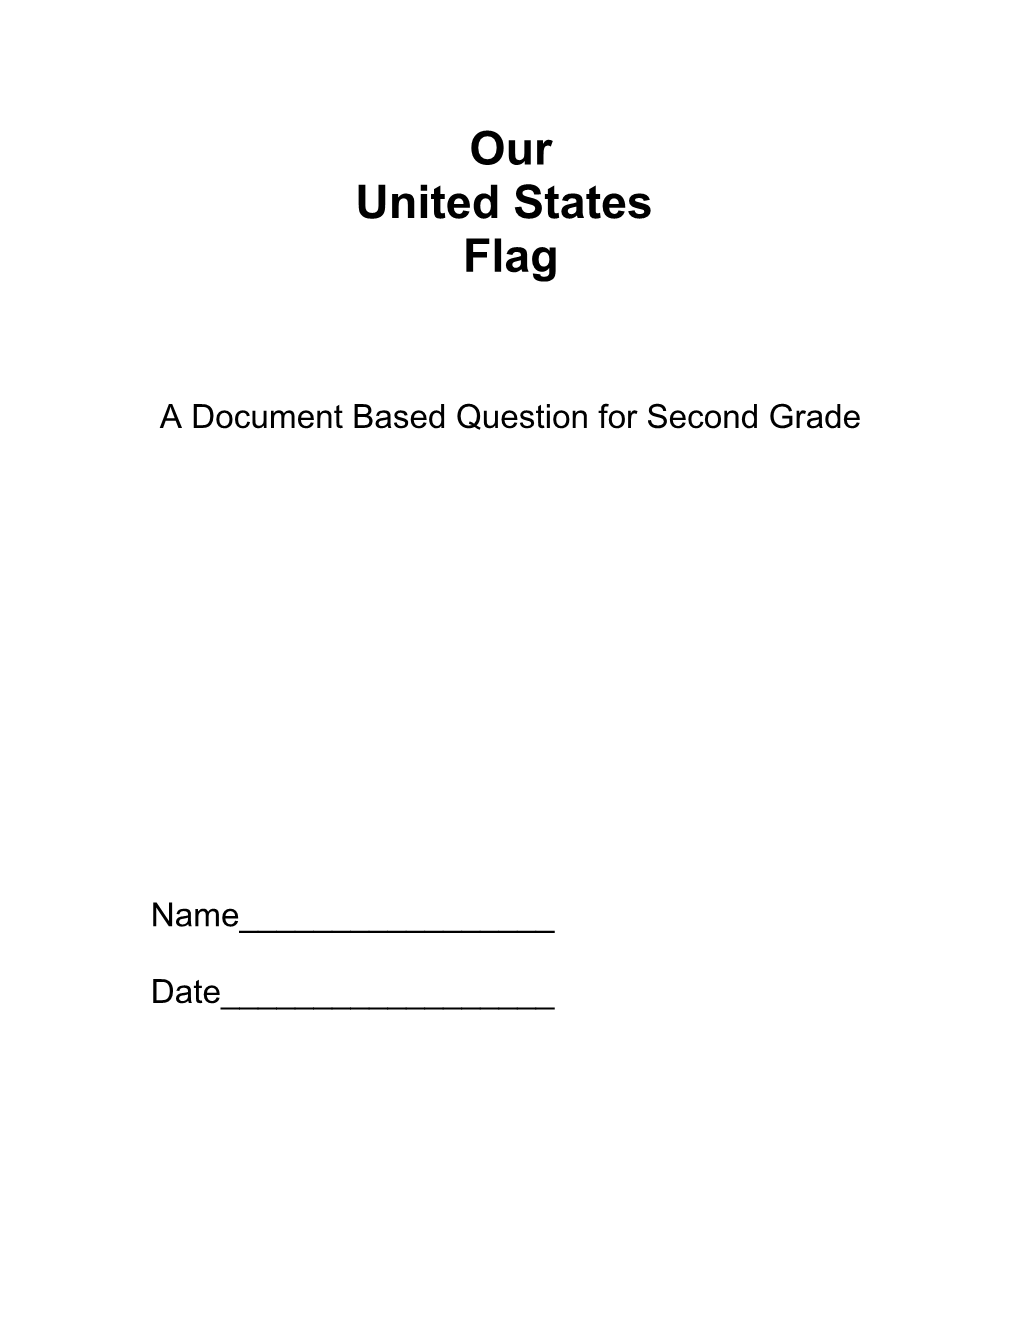 A Document Based Question for Second Grade